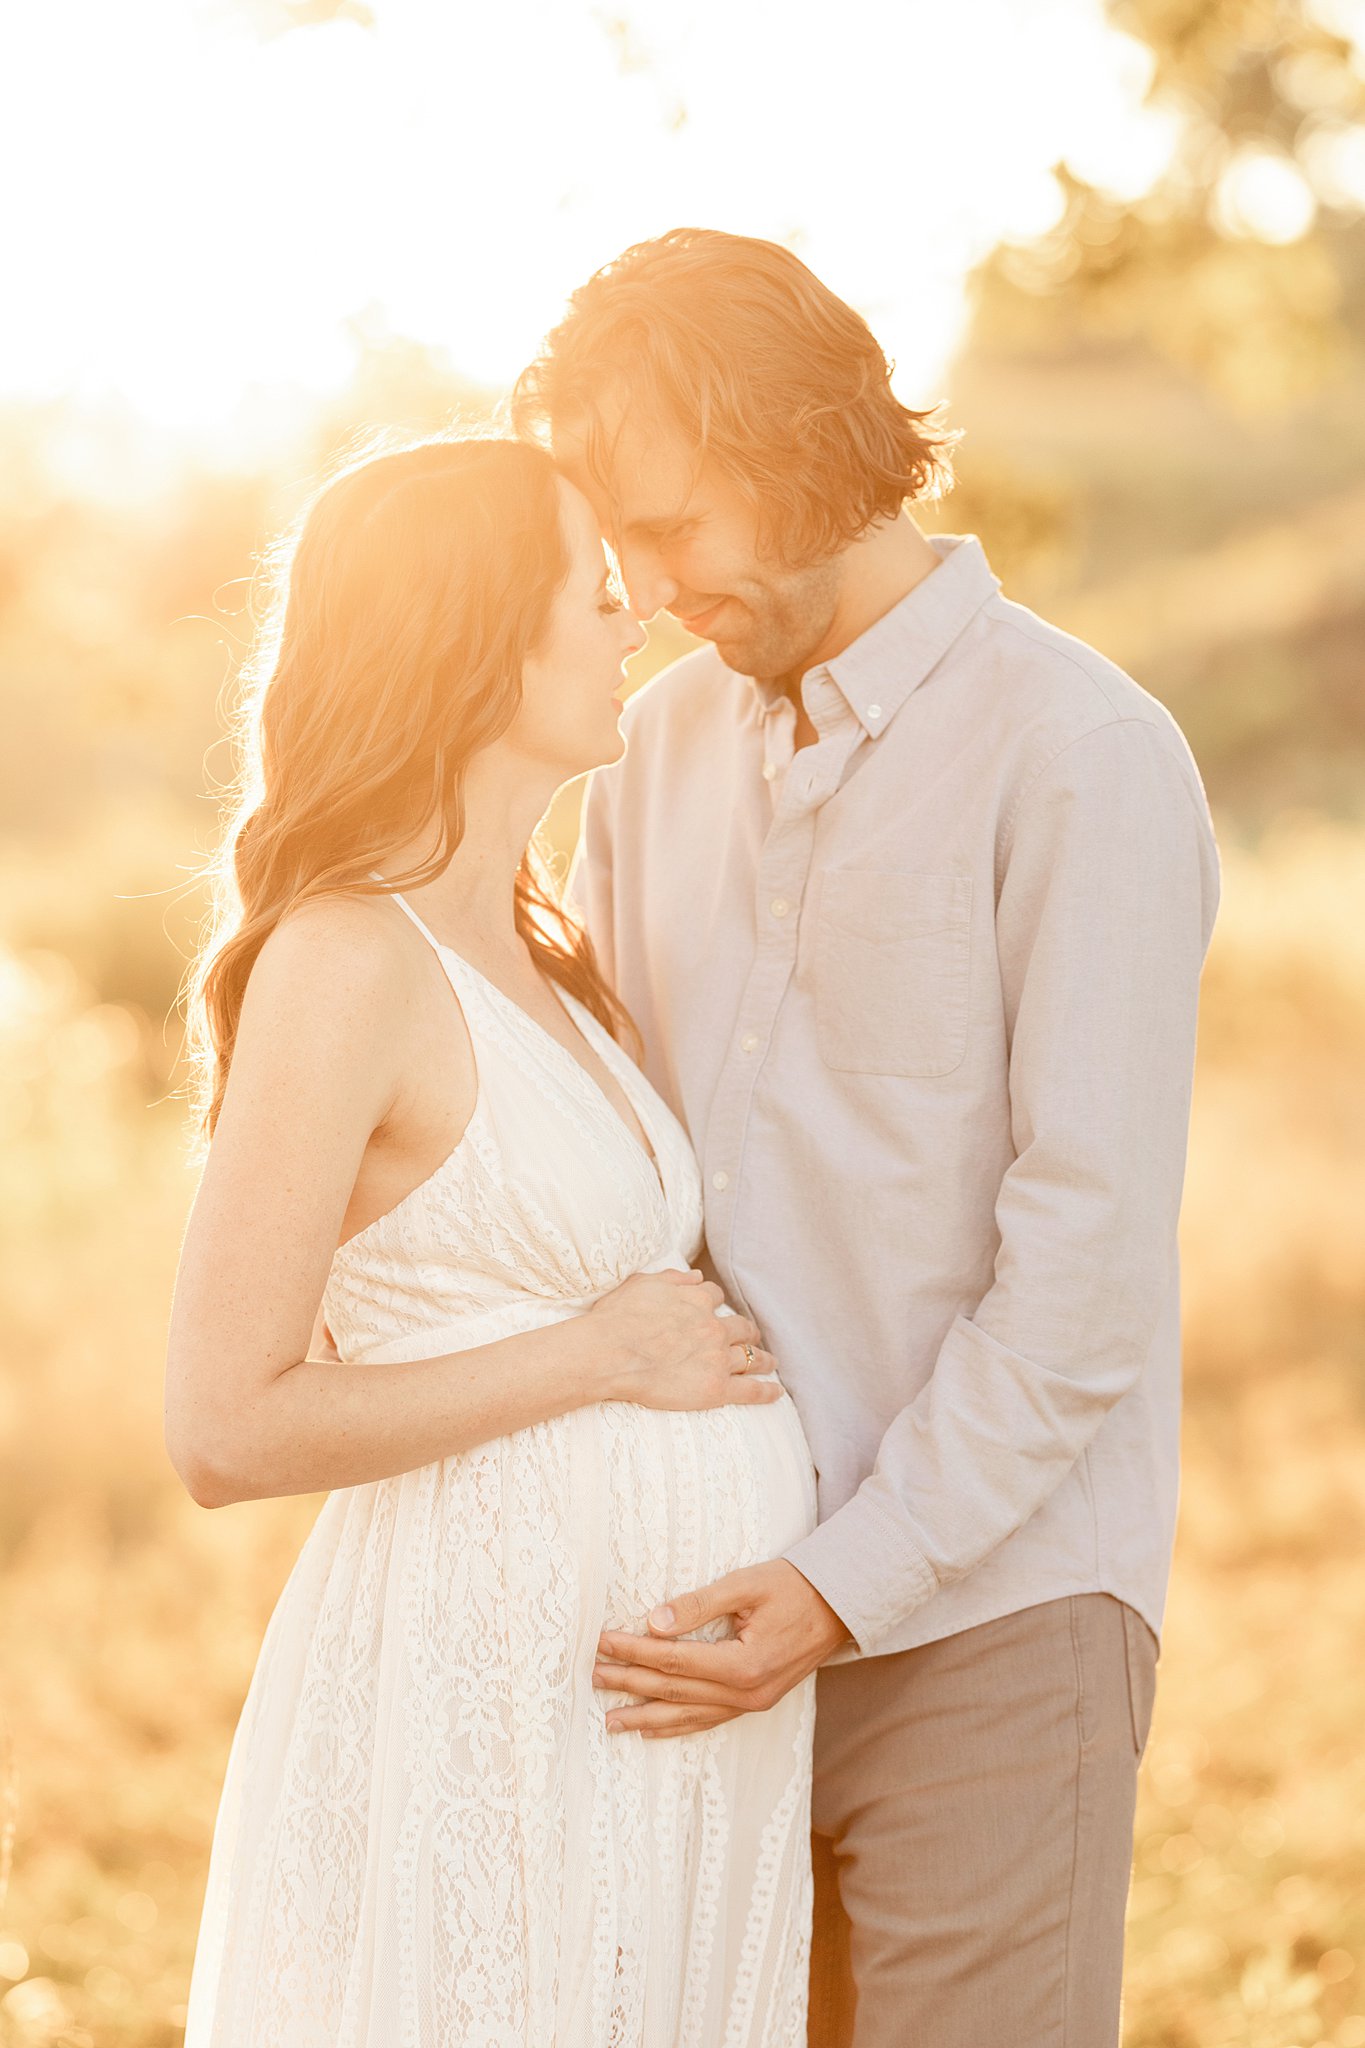 A mom to be nuzzles with her partner as they hold the bump and stand in a field at sunset